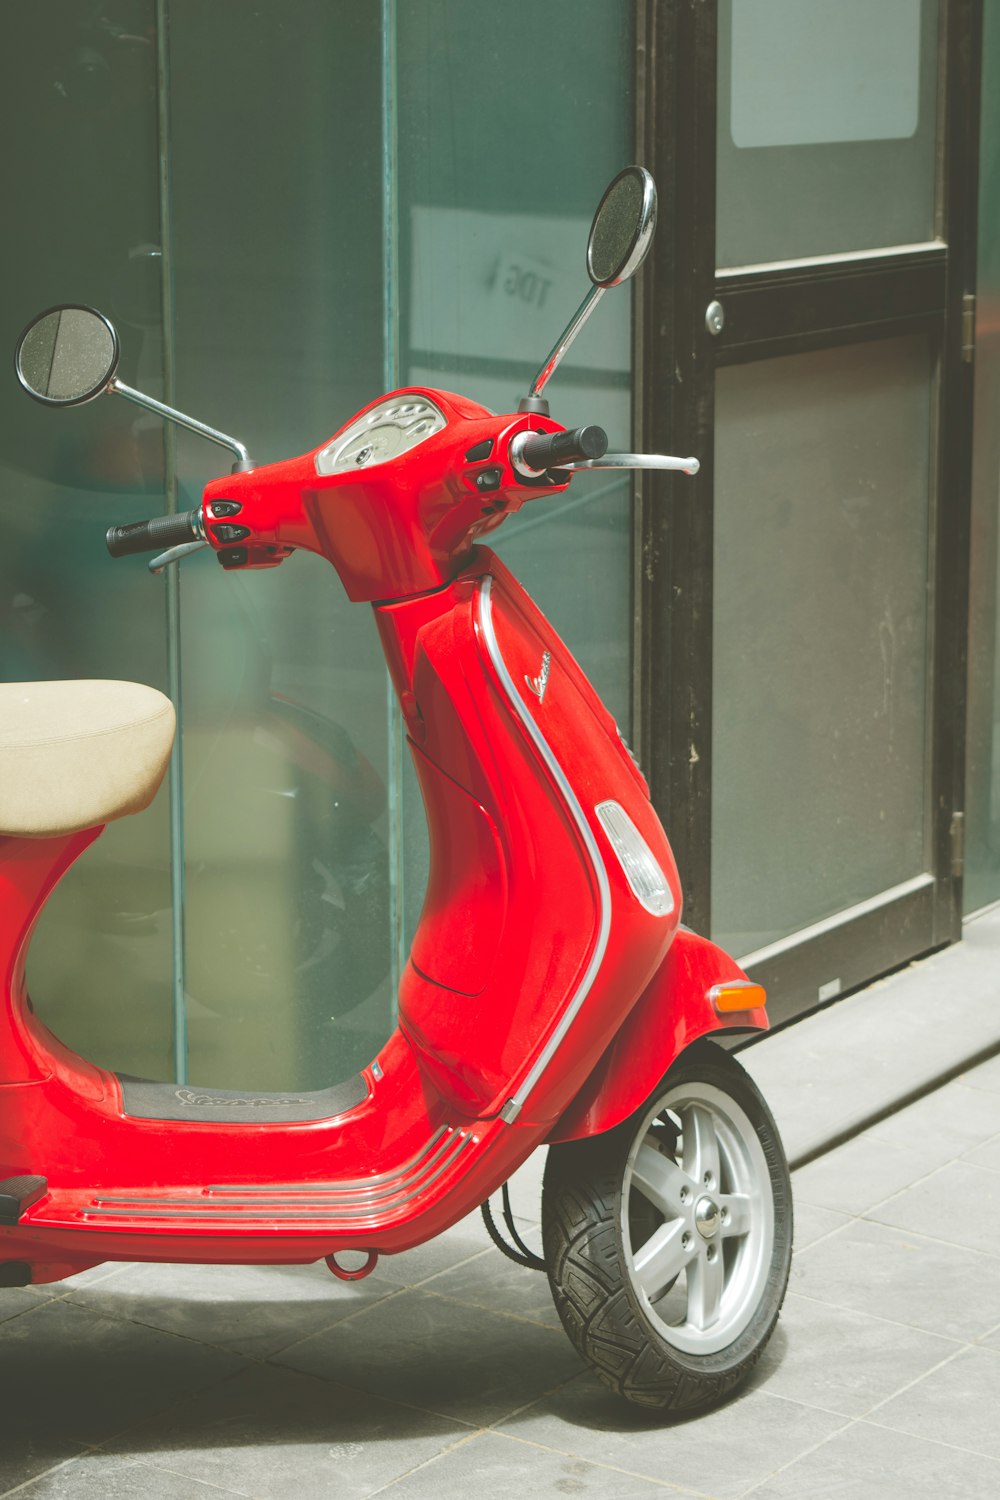 red and white motor scooter beside glass wall